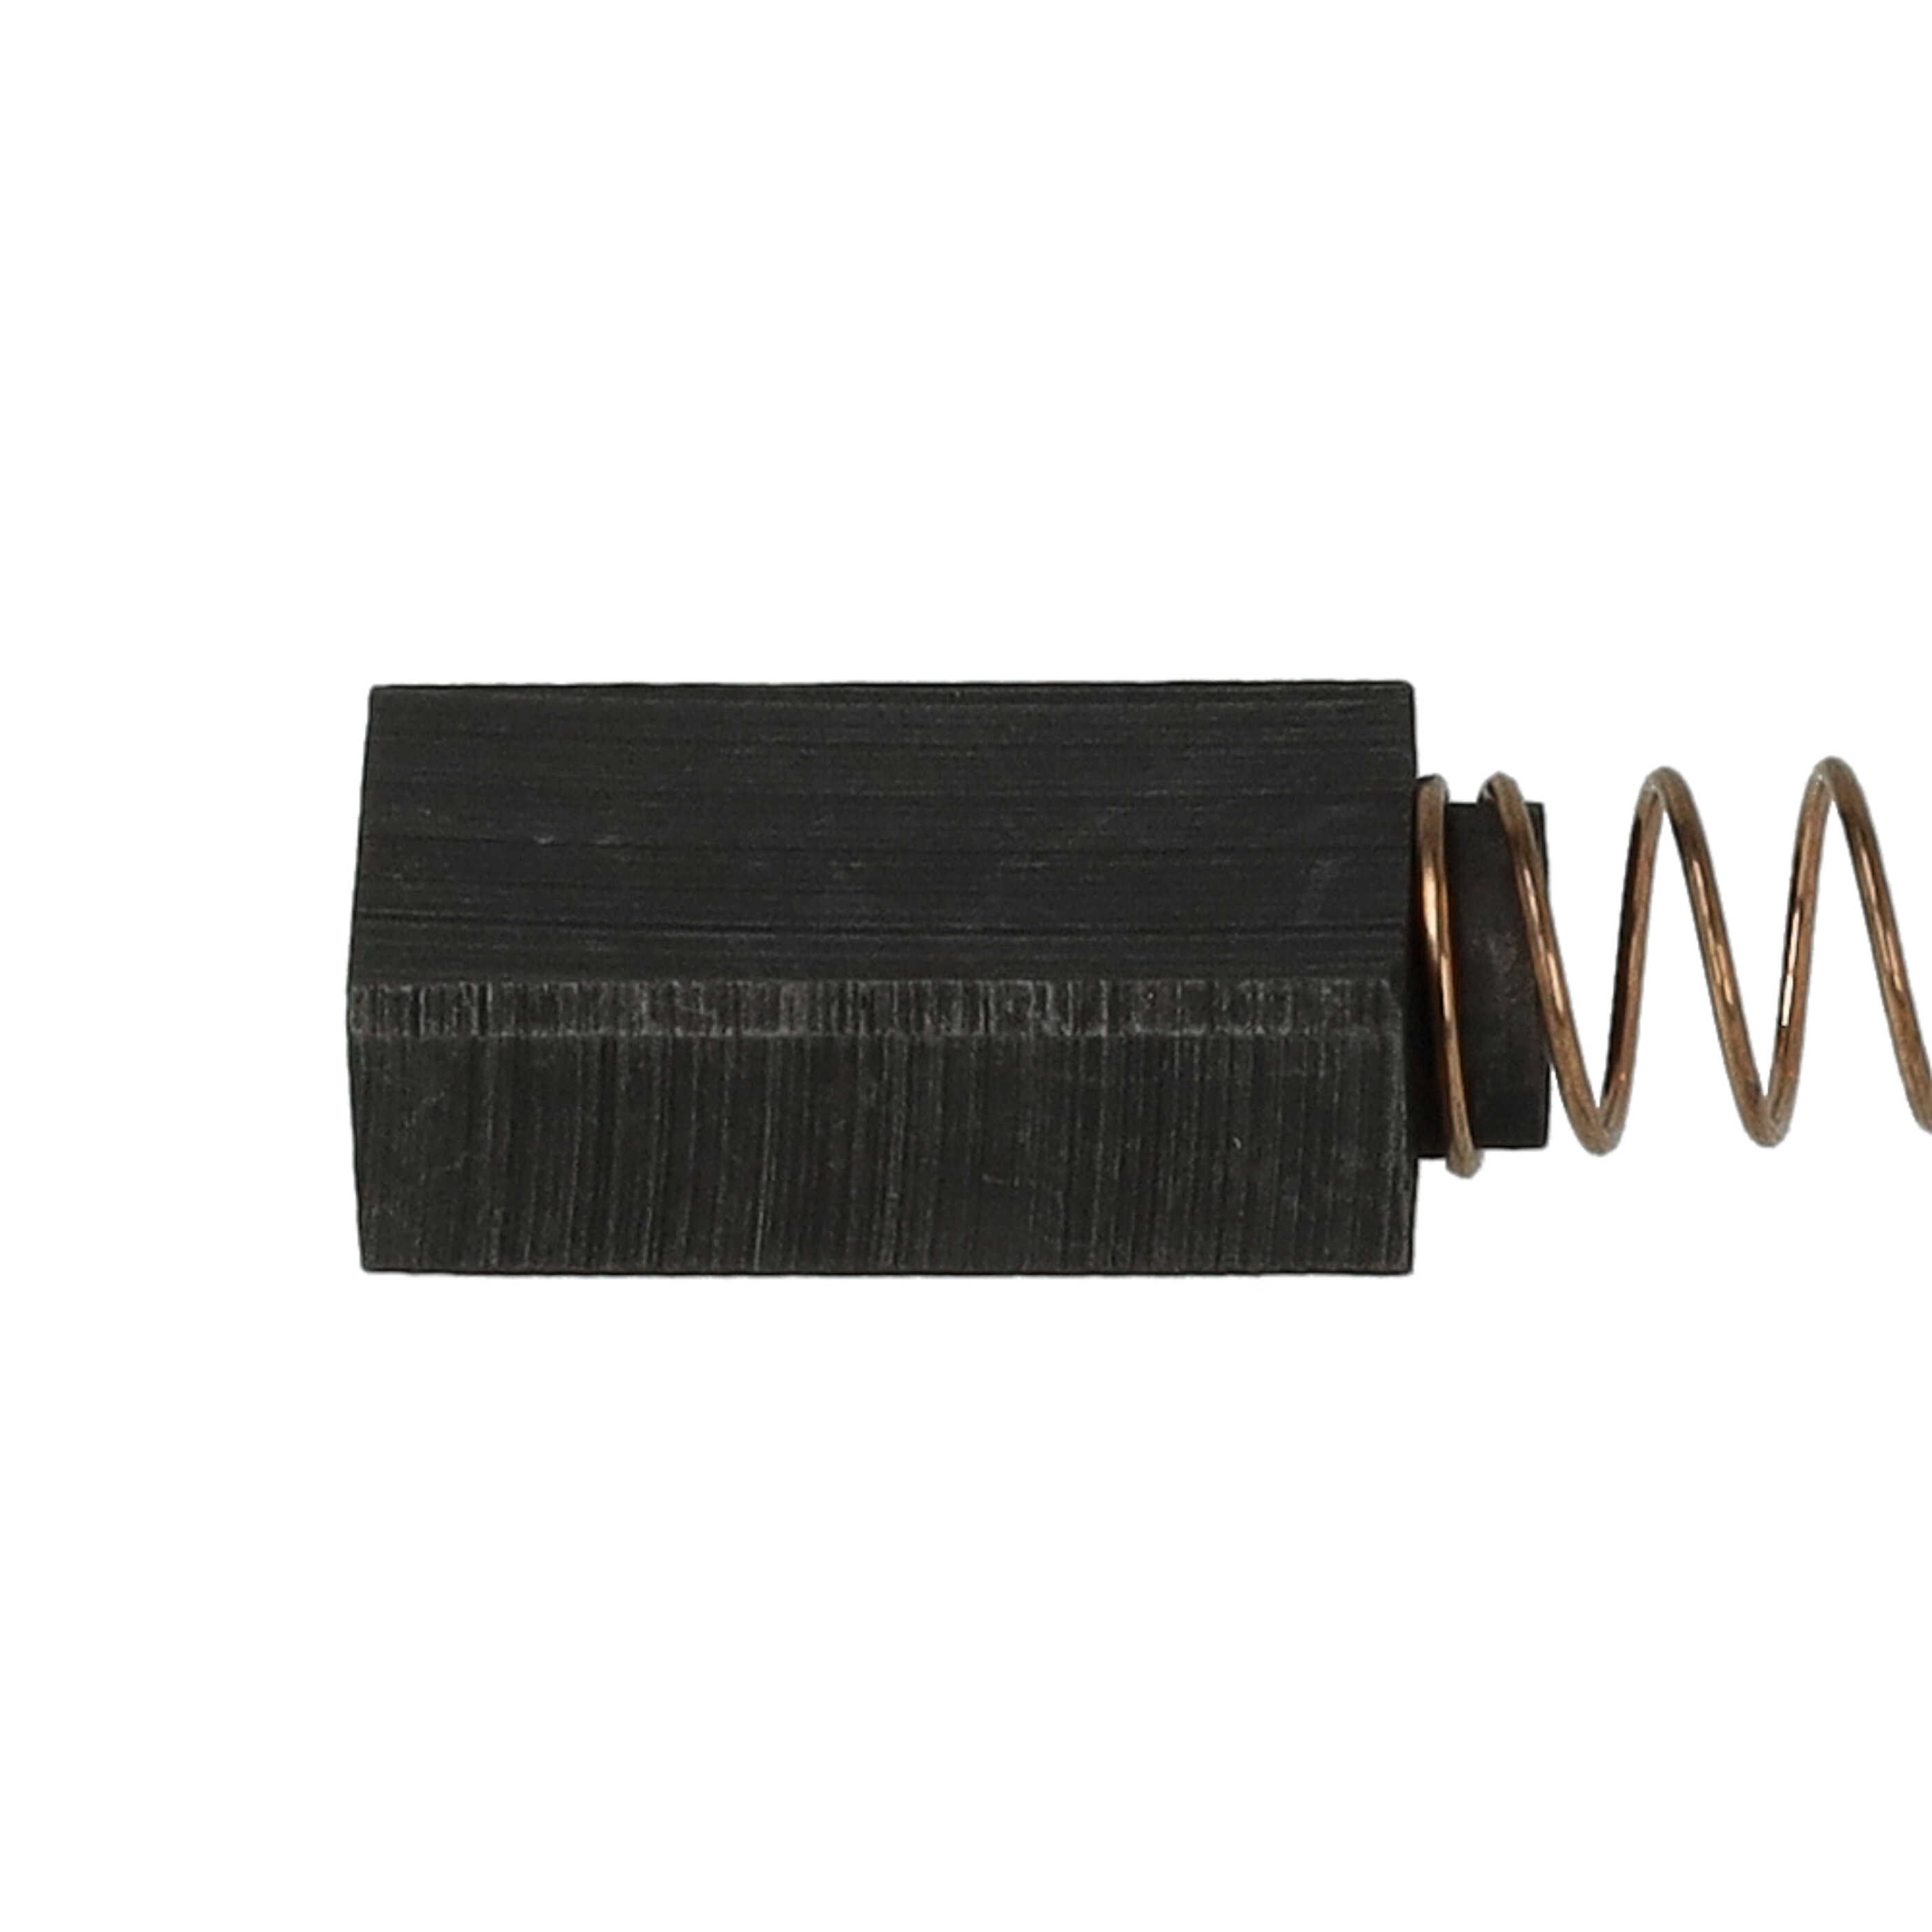 2x Carbon Brush 14 x 8 x 5 mm for for power tool